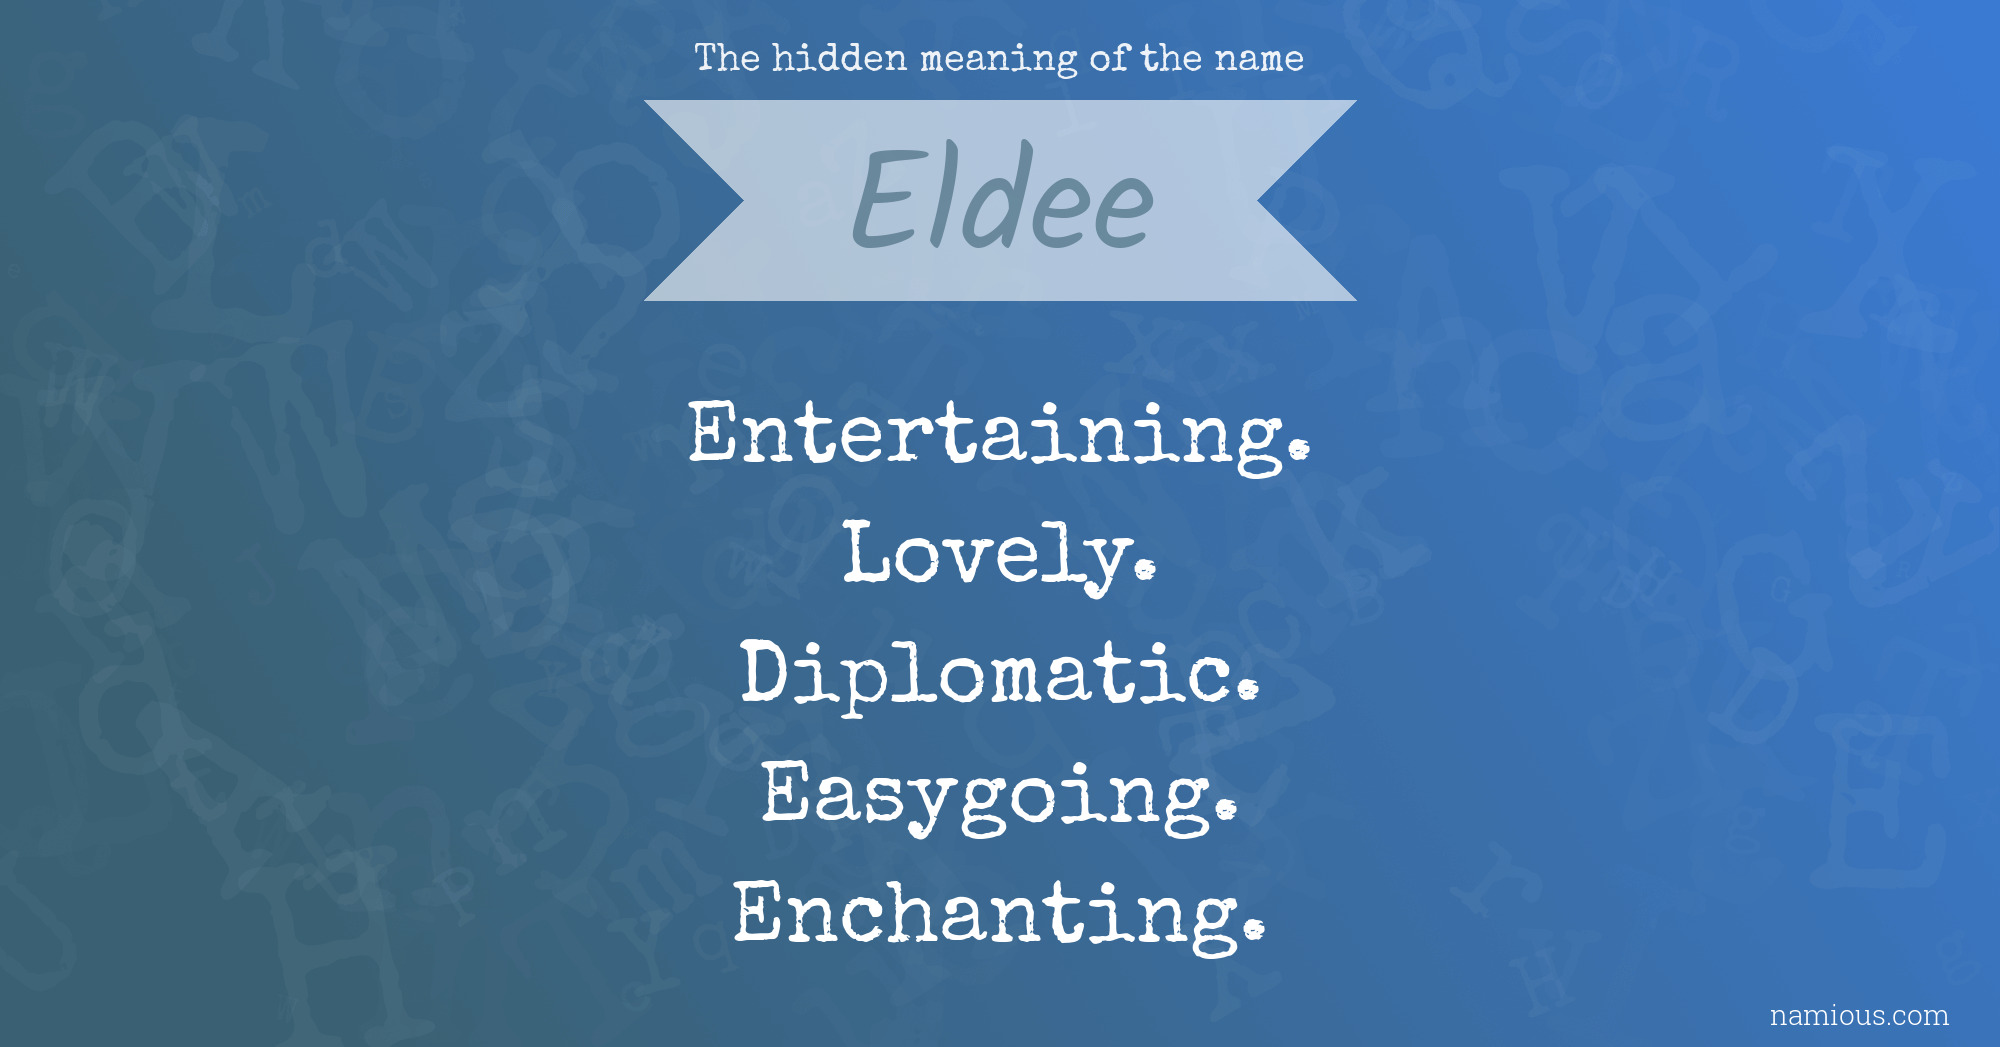 The hidden meaning of the name Eldee